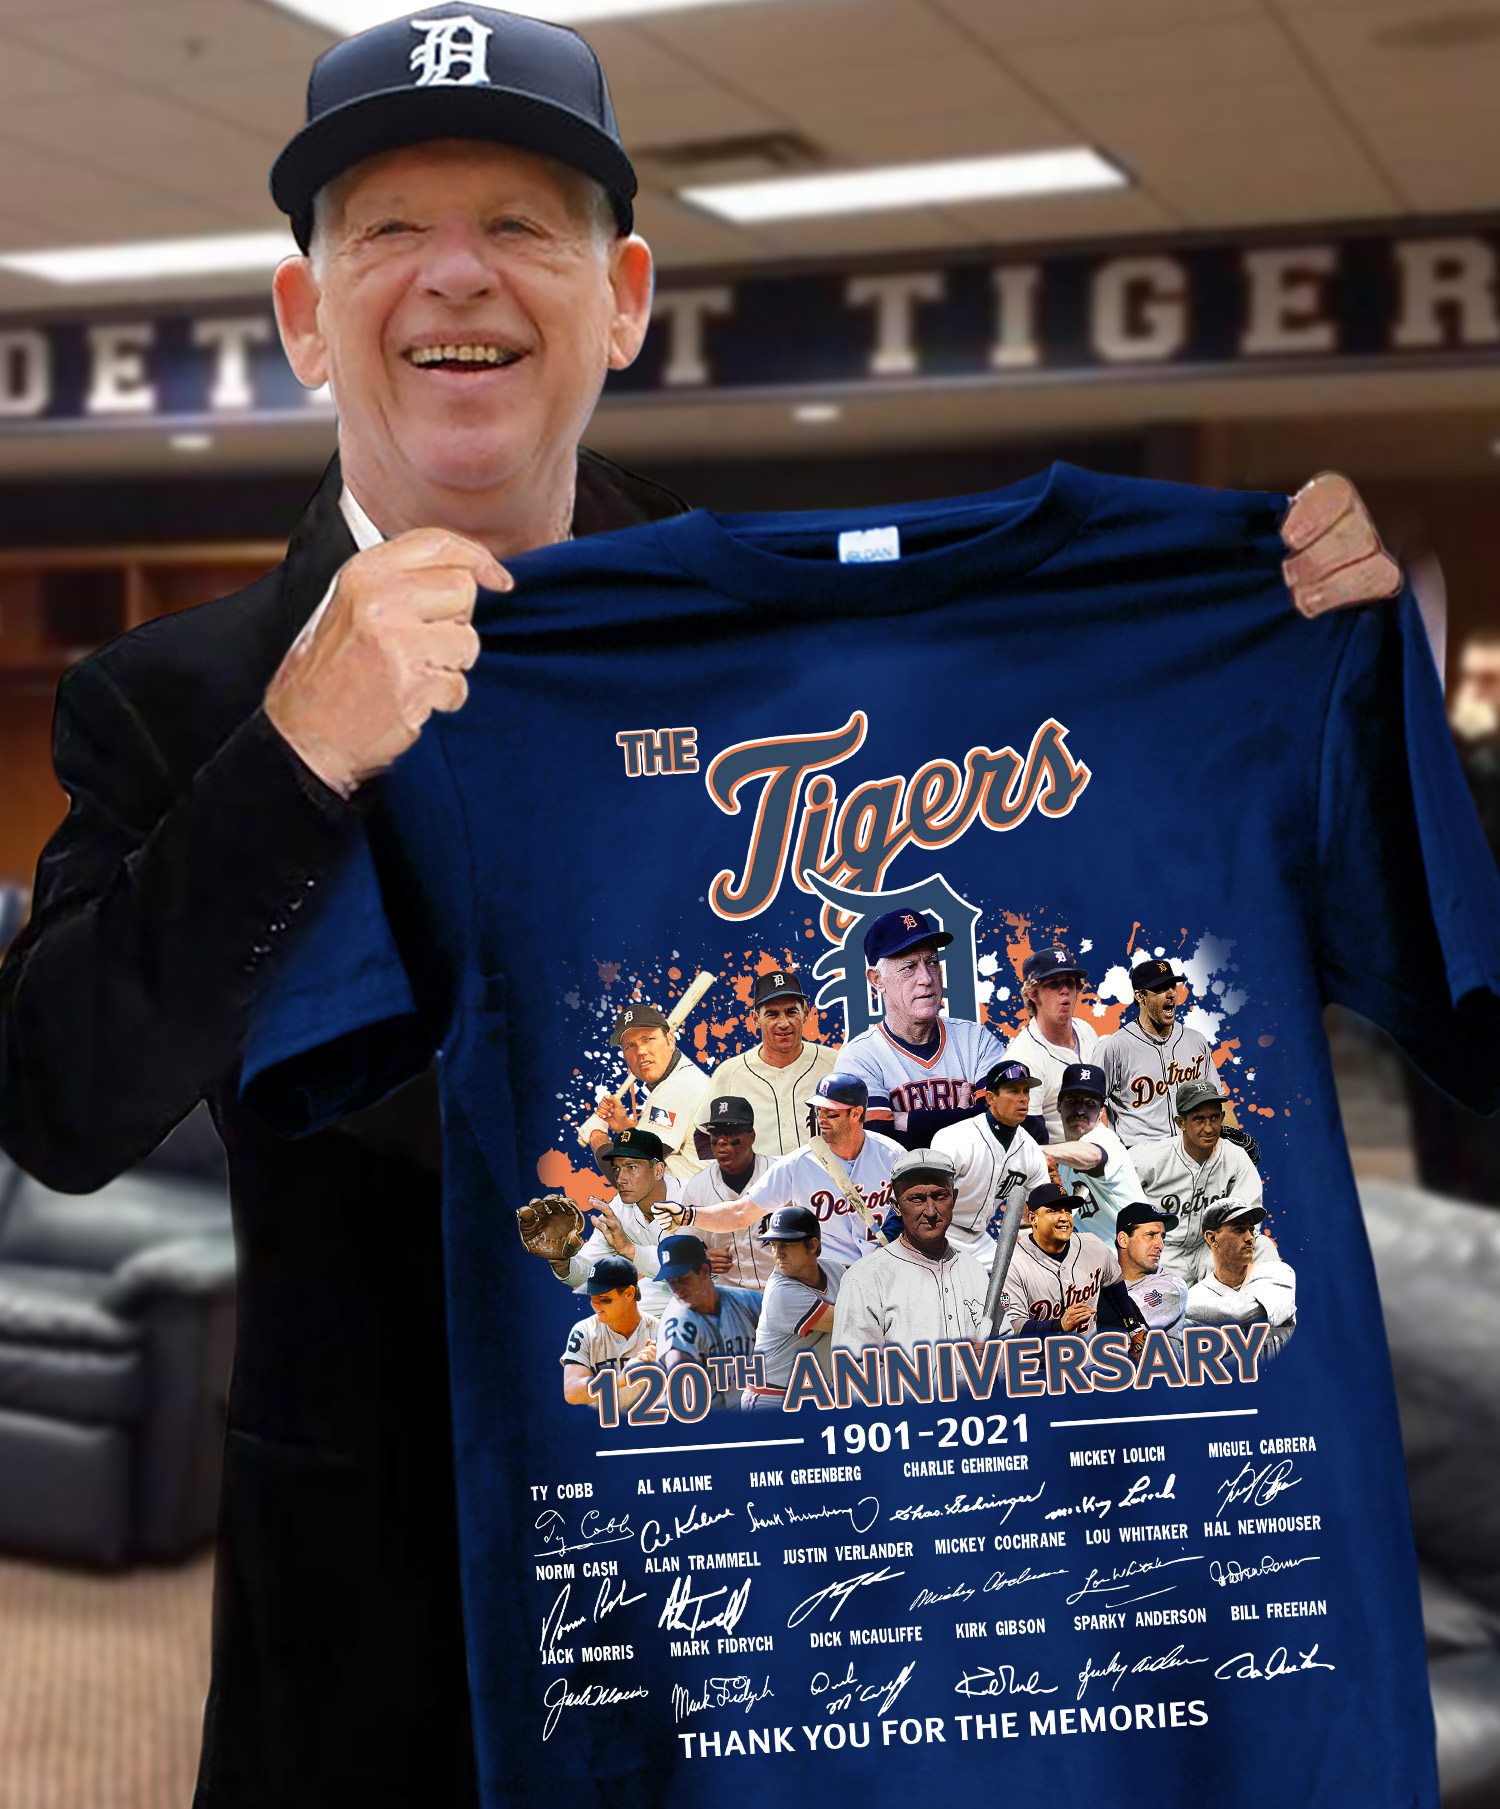 the tigers 120th anniversary. thank you for the memories